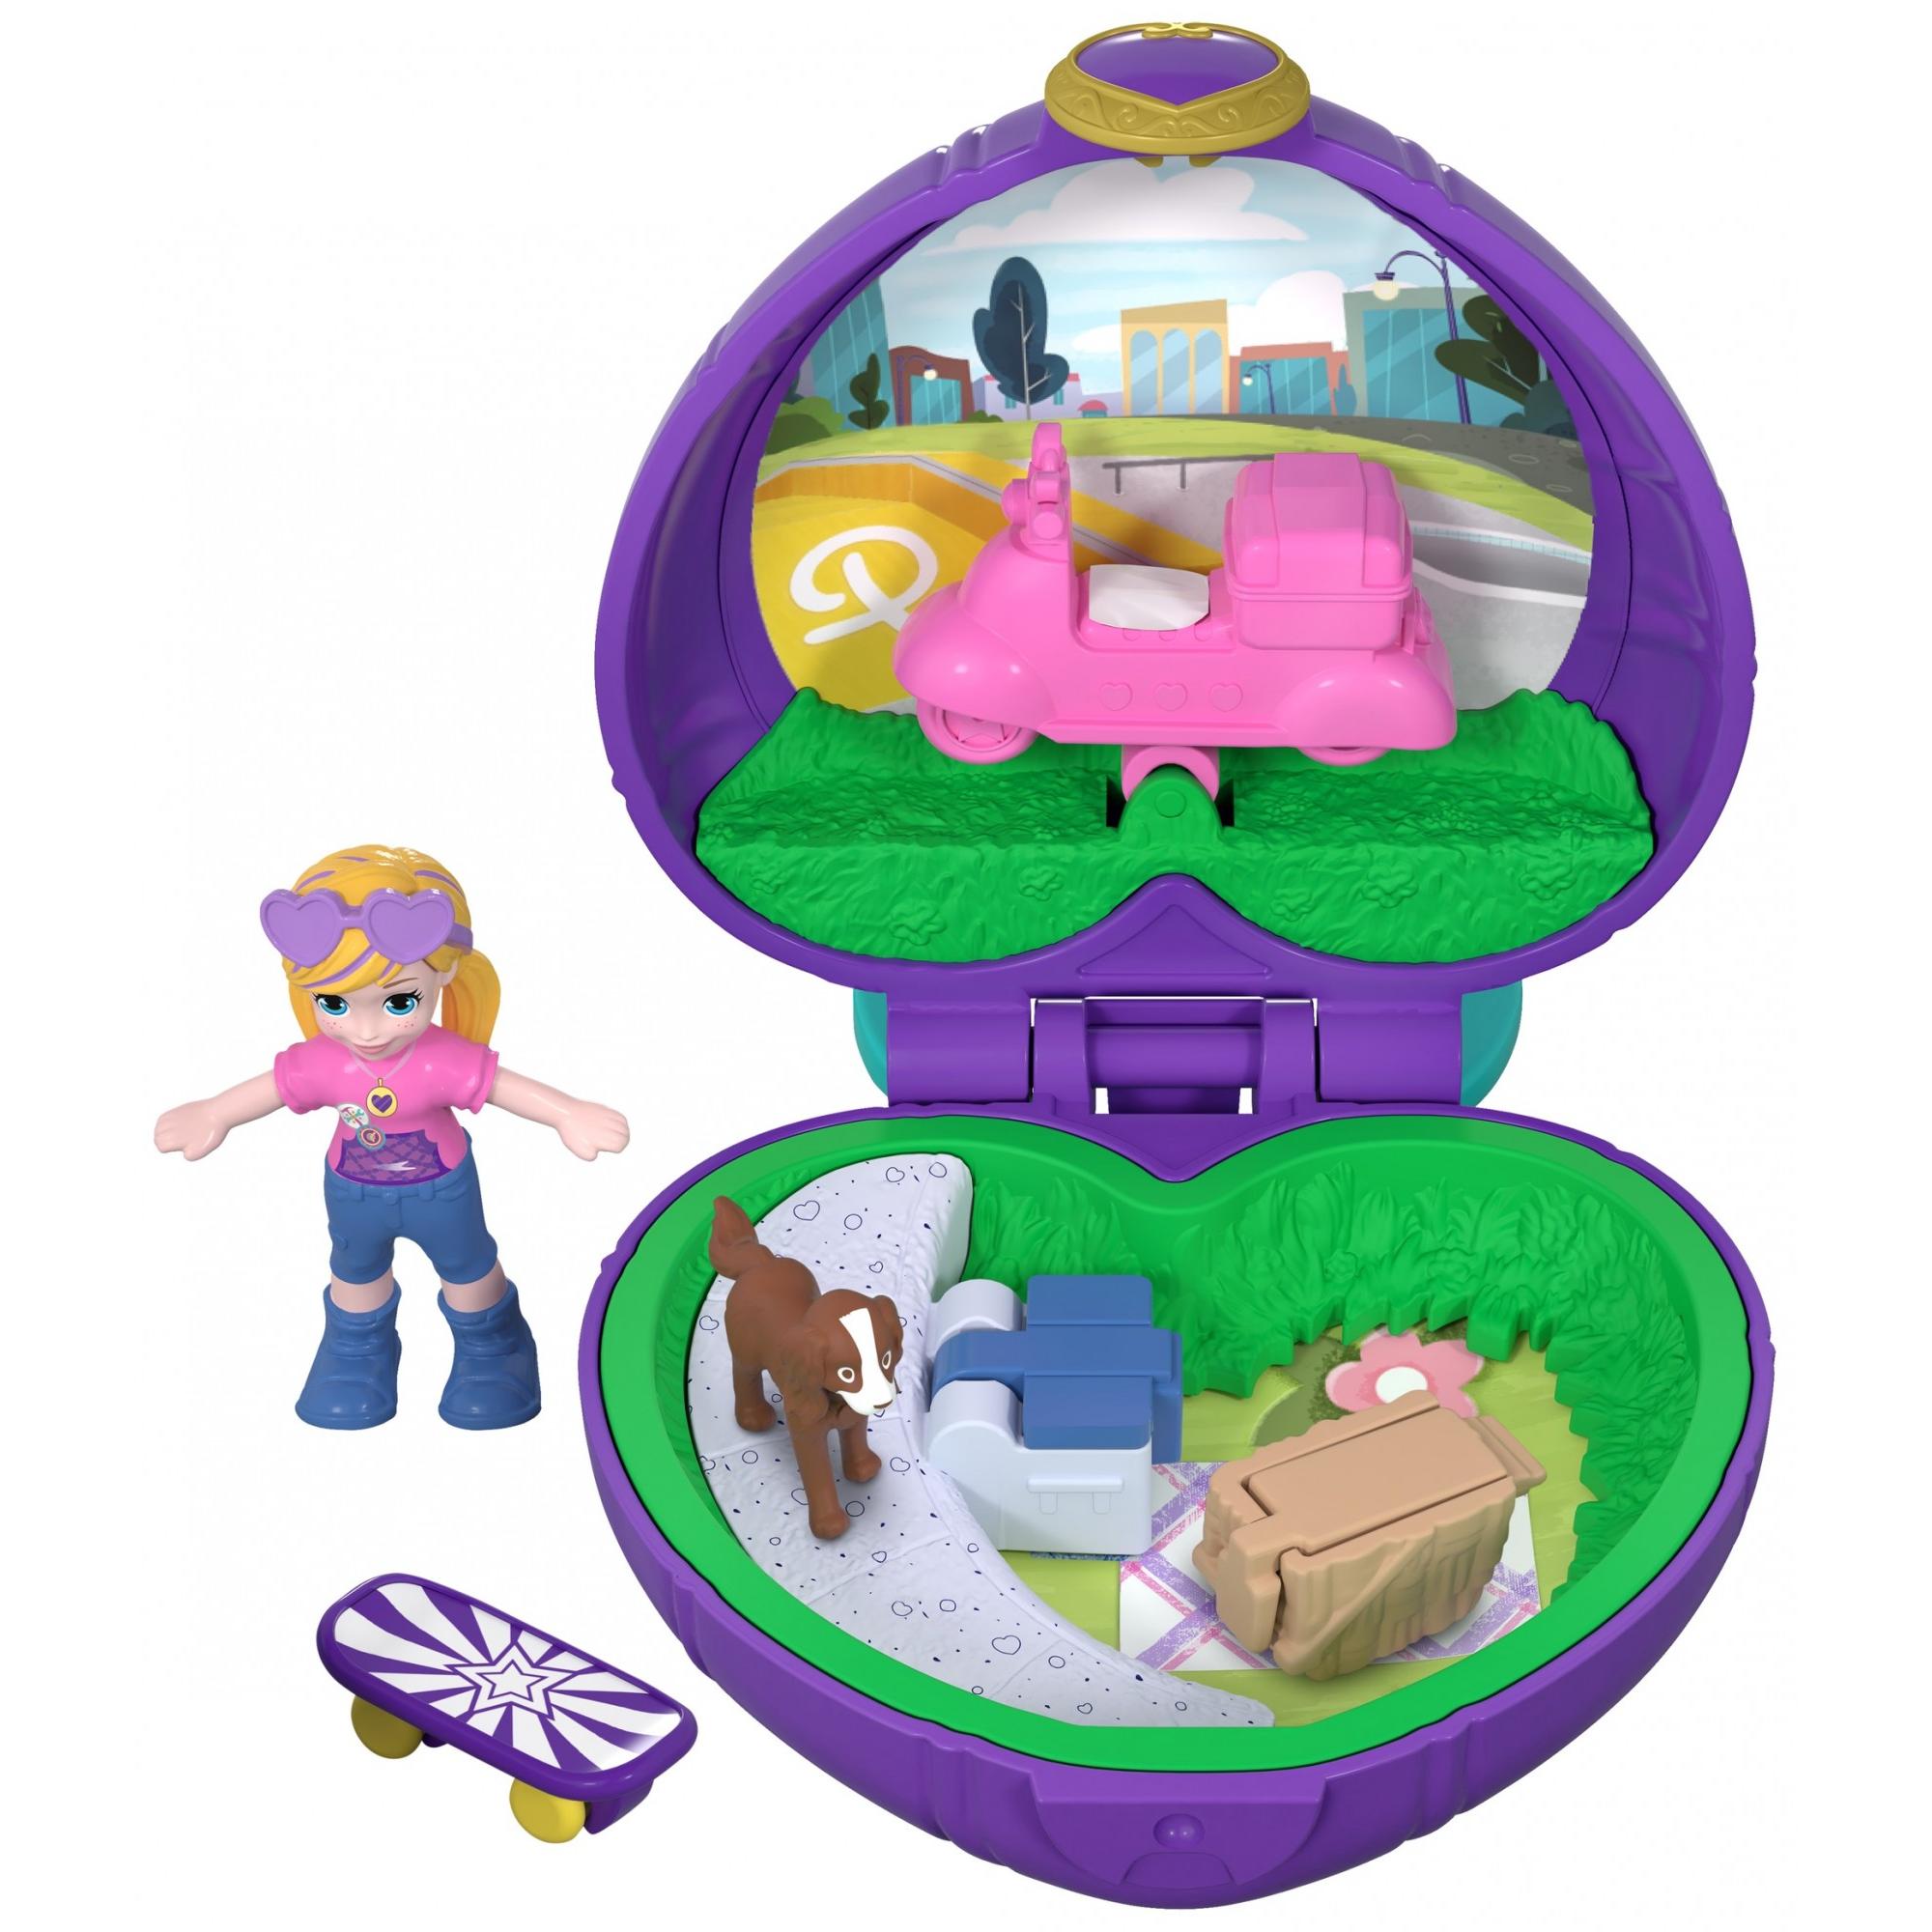 Polly Pocket Tiny Pocket Places Picnic Portable Compact - image 1 of 7